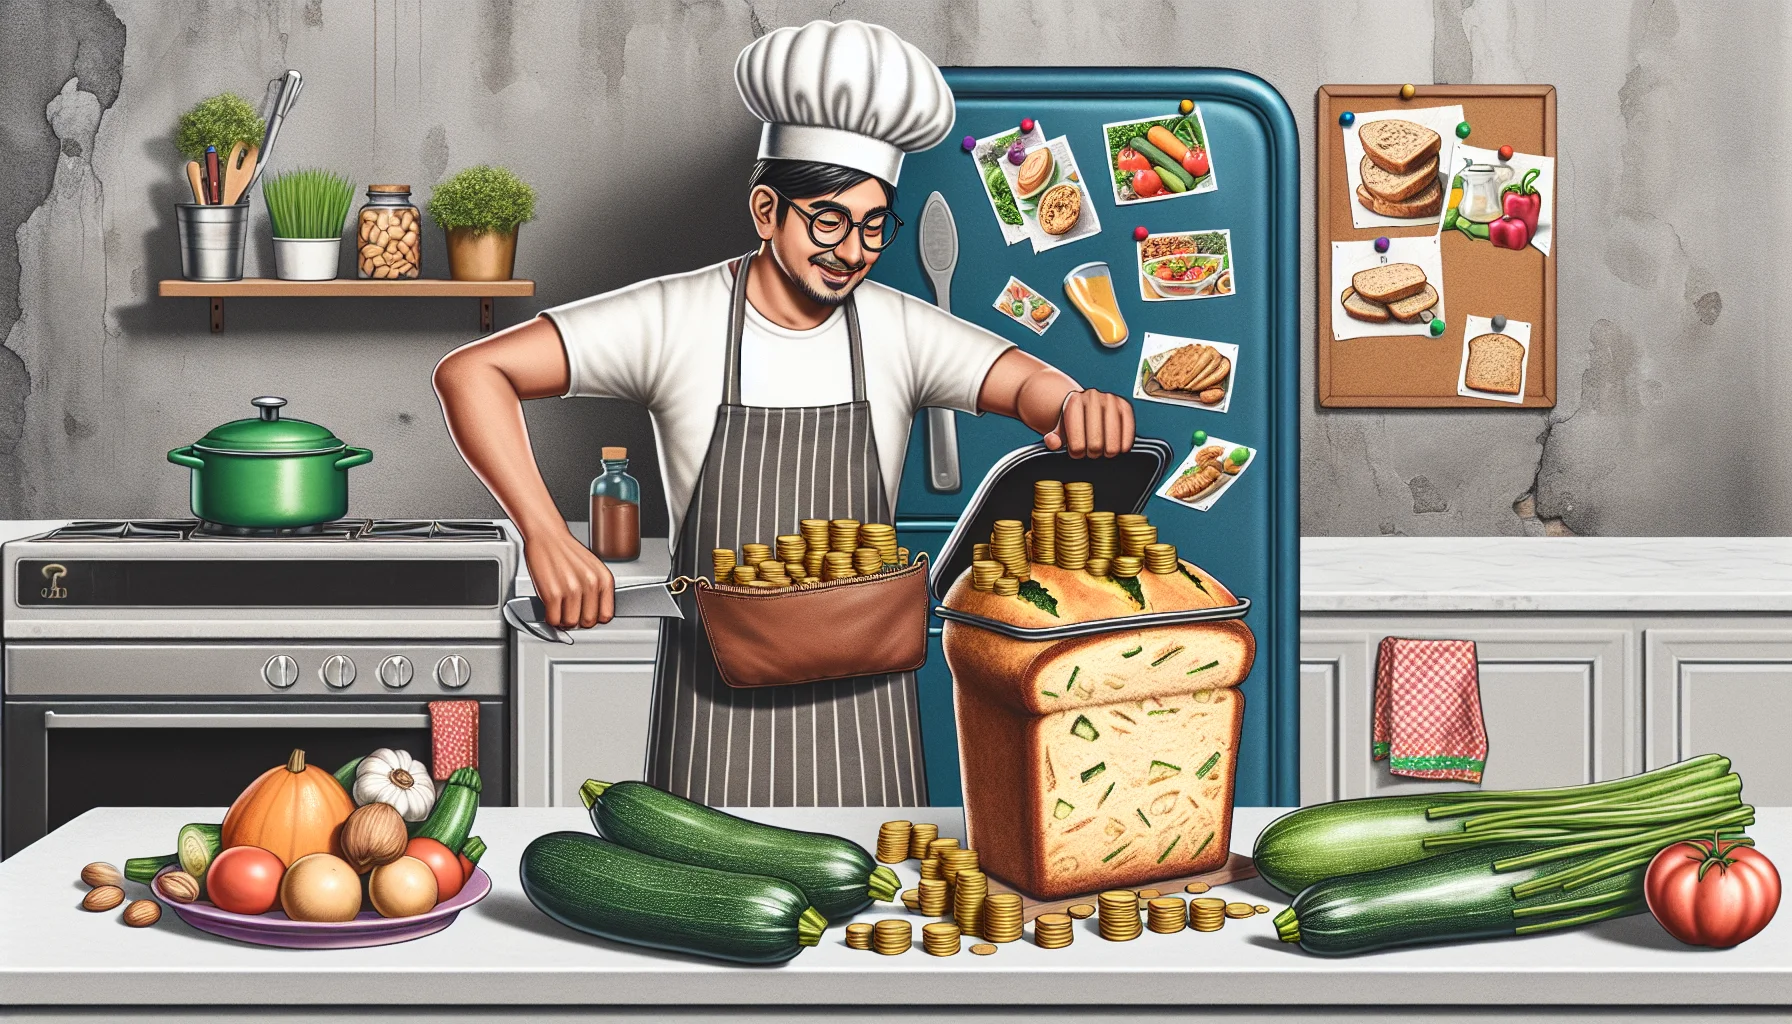 Create an image of a playful scene inside a kitchen where a South Asian man, wearing a chef's hat and apron, is sealing a loaf of freshly baked zucchini bread in an air-tight container. The loaf should look appetizing and is highlighted with a platform of gold coins underneath it symbolizing affordability. Surroundings should showcase healthy ingredients like zucchinis, wholegrains and nuts. To add humor, include a realistic-looking caricature of a wallet peeking out from the man's back pocket, bursting with greenery implying the concept of eating healthily for less. The background should have a magnetic fridge plastered with vibrant recipe sheets which emphasize vegetables.